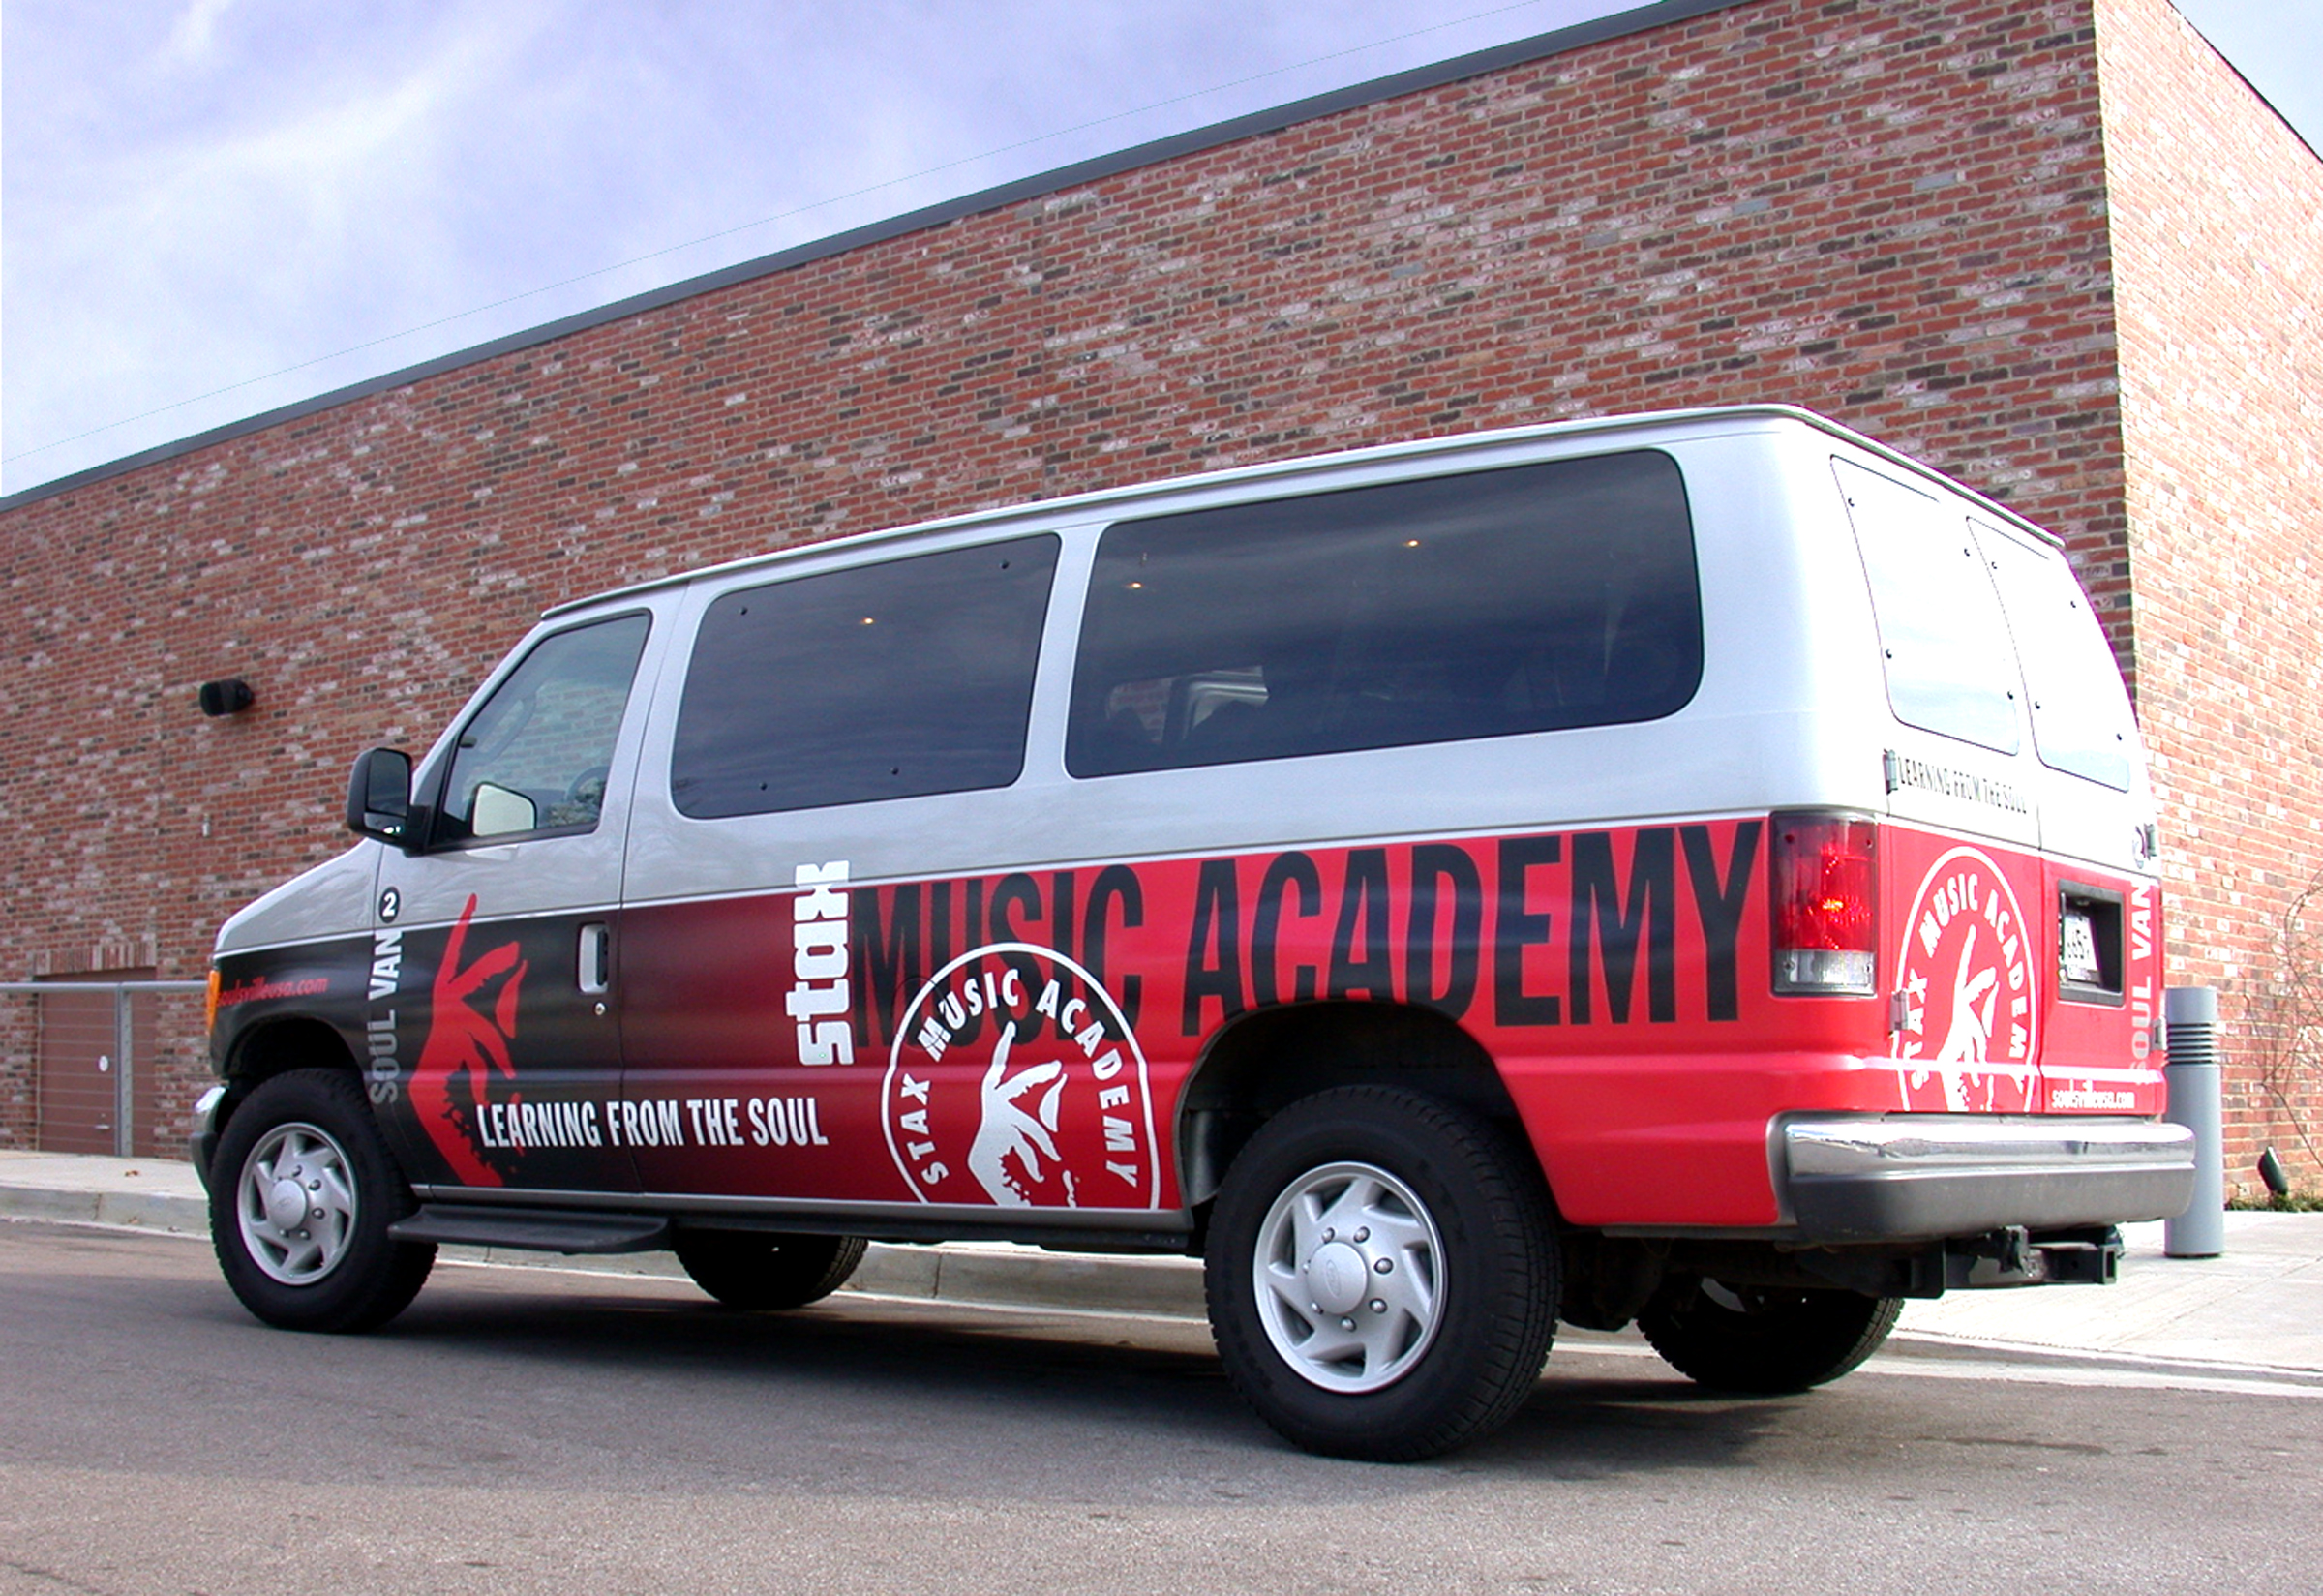  STAX Music Academy students van  Branding creative and design by Chuck Mitchell 